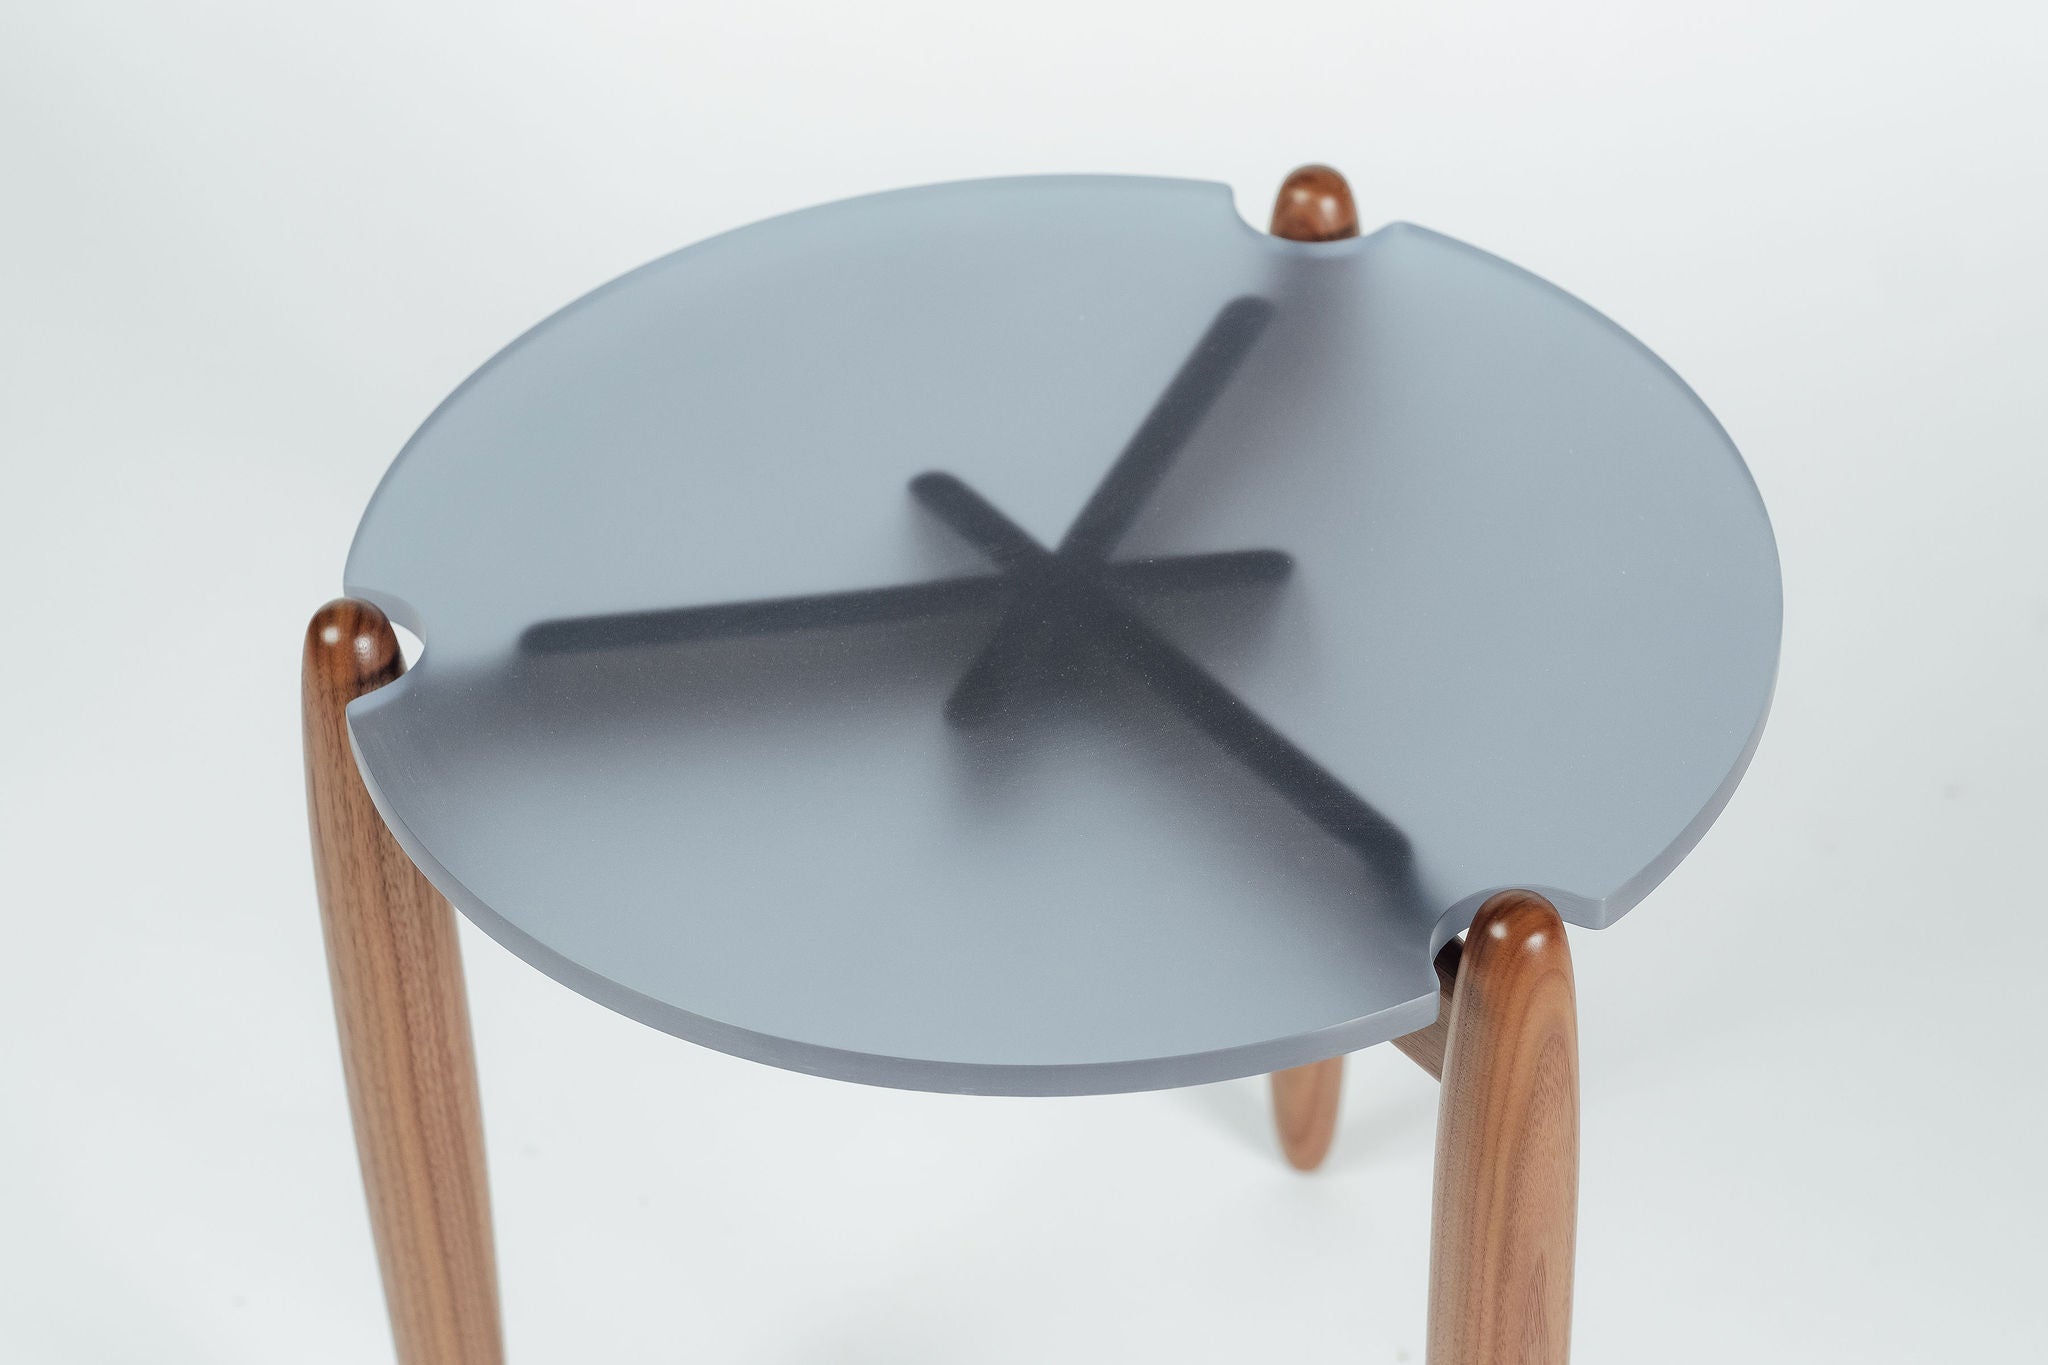 Ray midcentury modern walnut wood blue acrylic side table handcrafted by Hunt & Noyer in Michigan